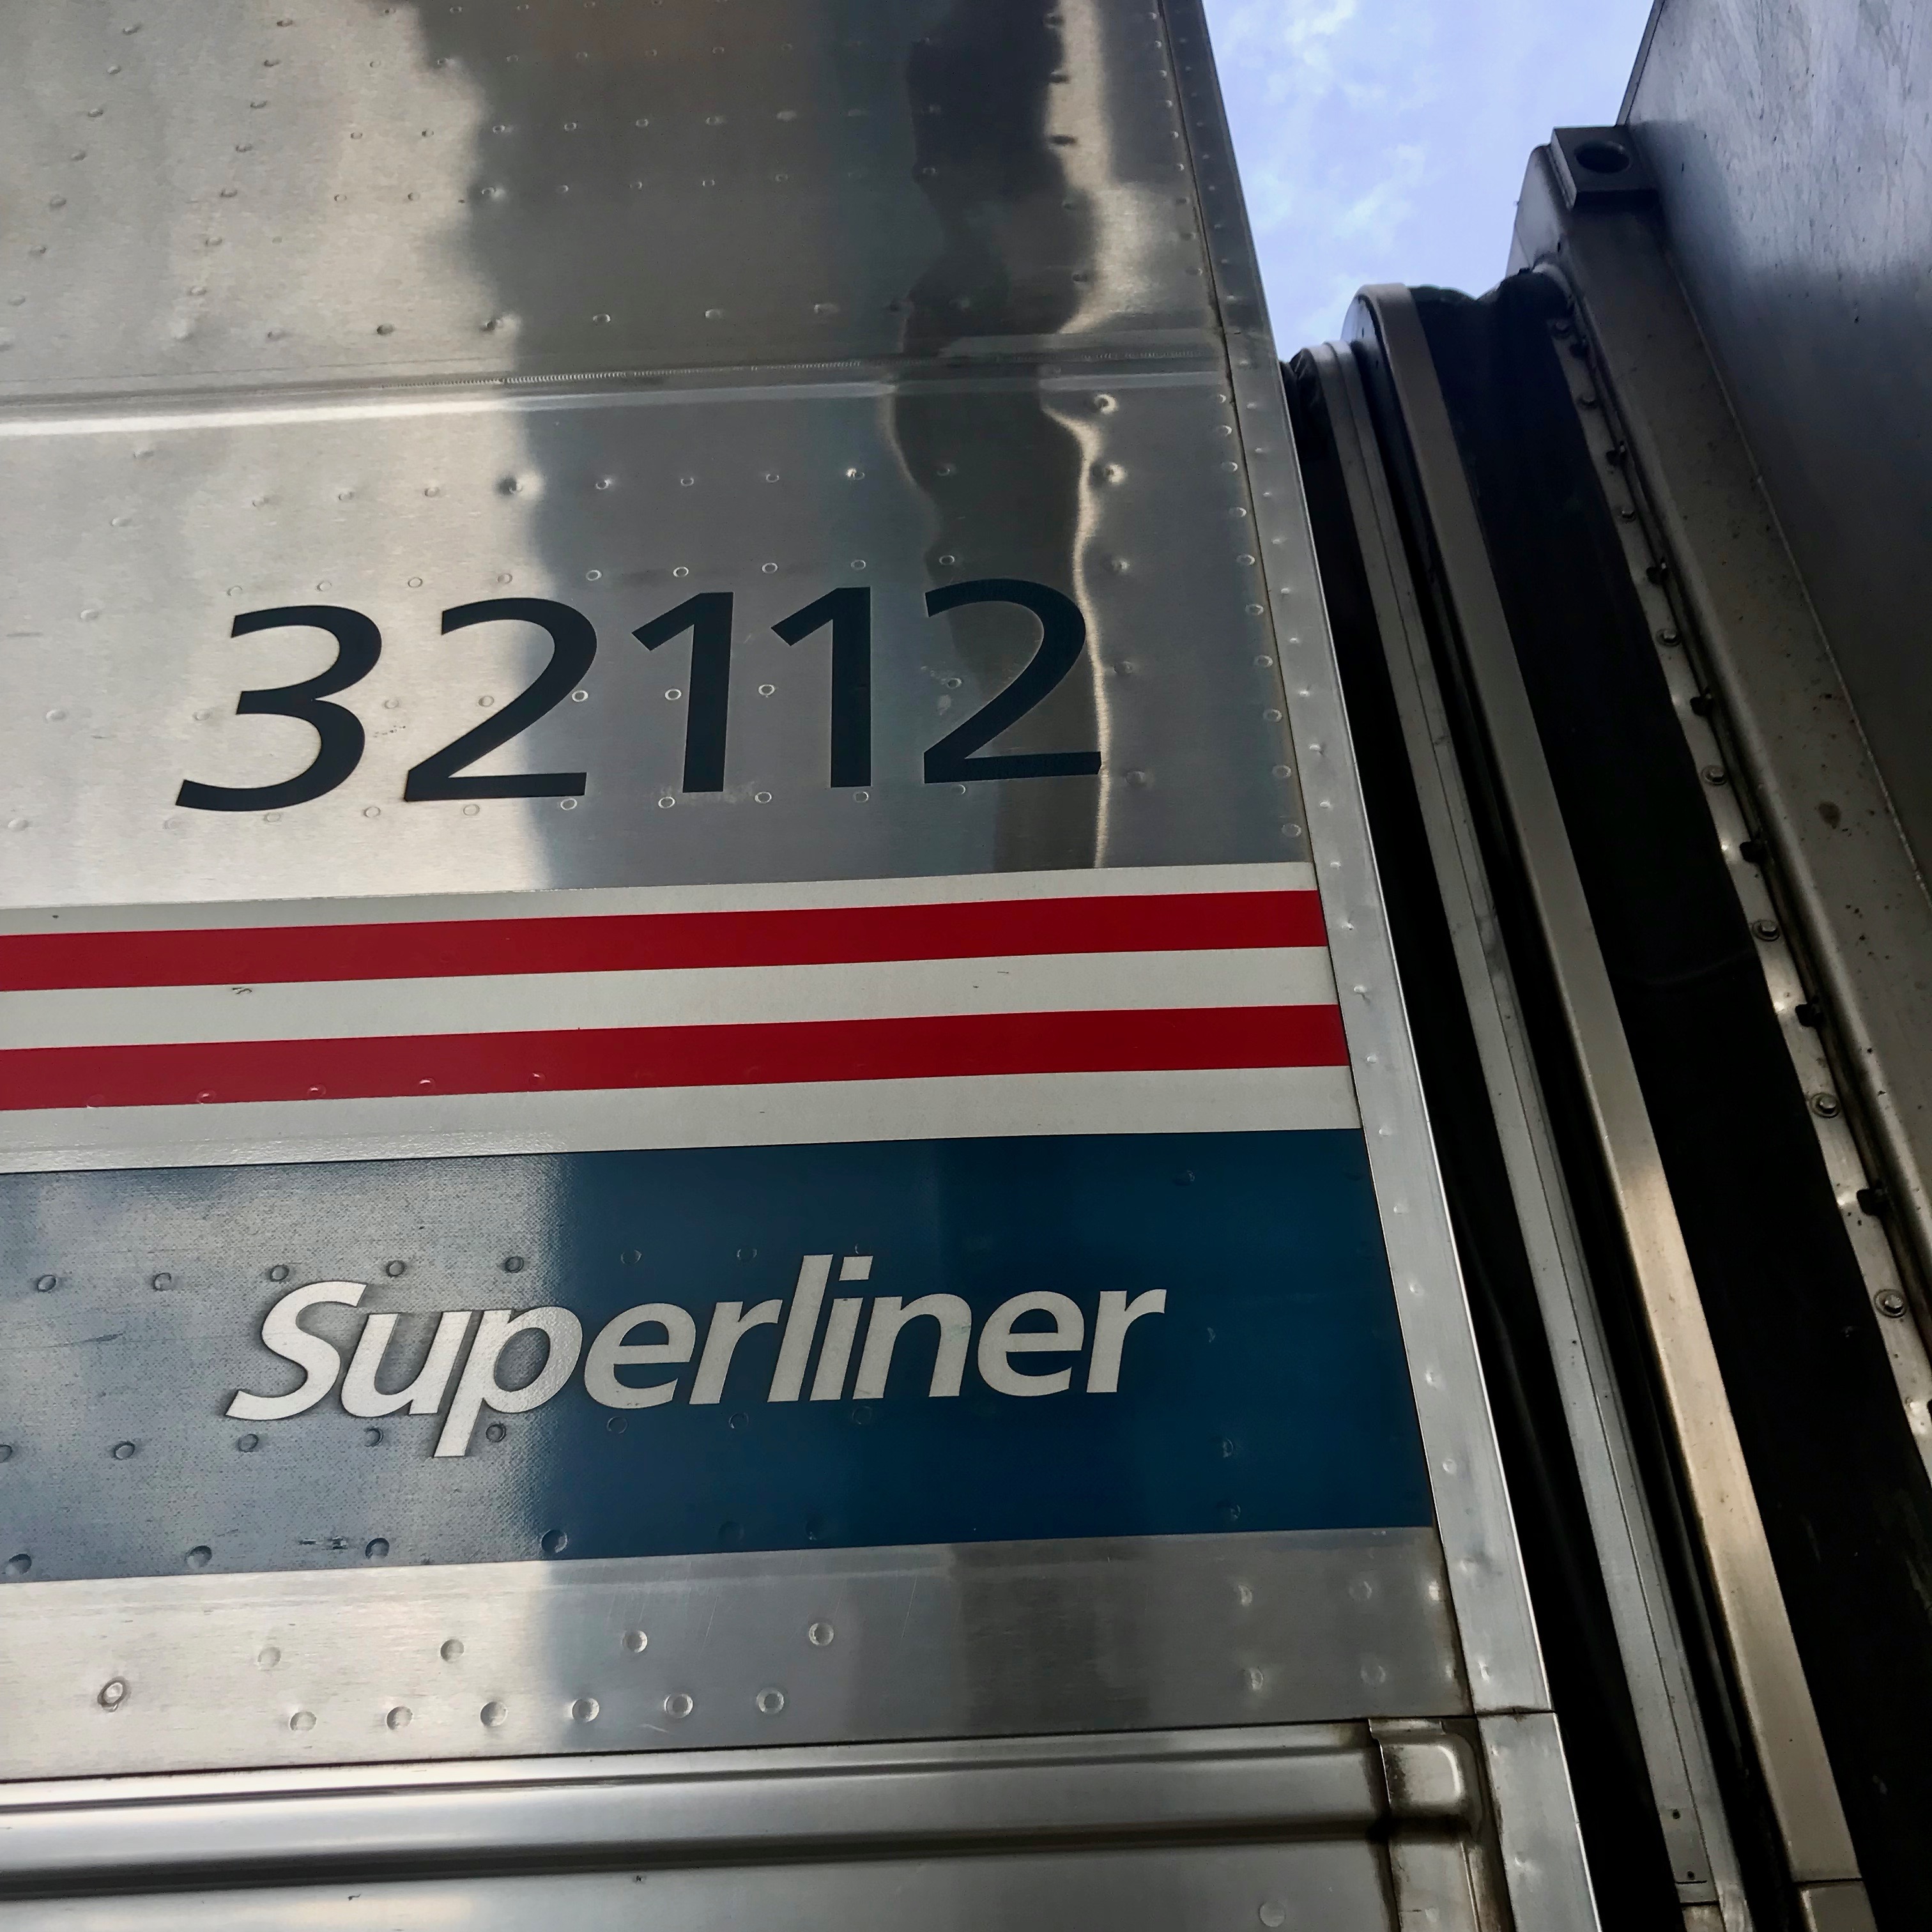 Amtrak operates the double-decker Superliner rail cars on long-distance trains like the Empire Builder, which travels between Chicago and Seattle/Portland. 